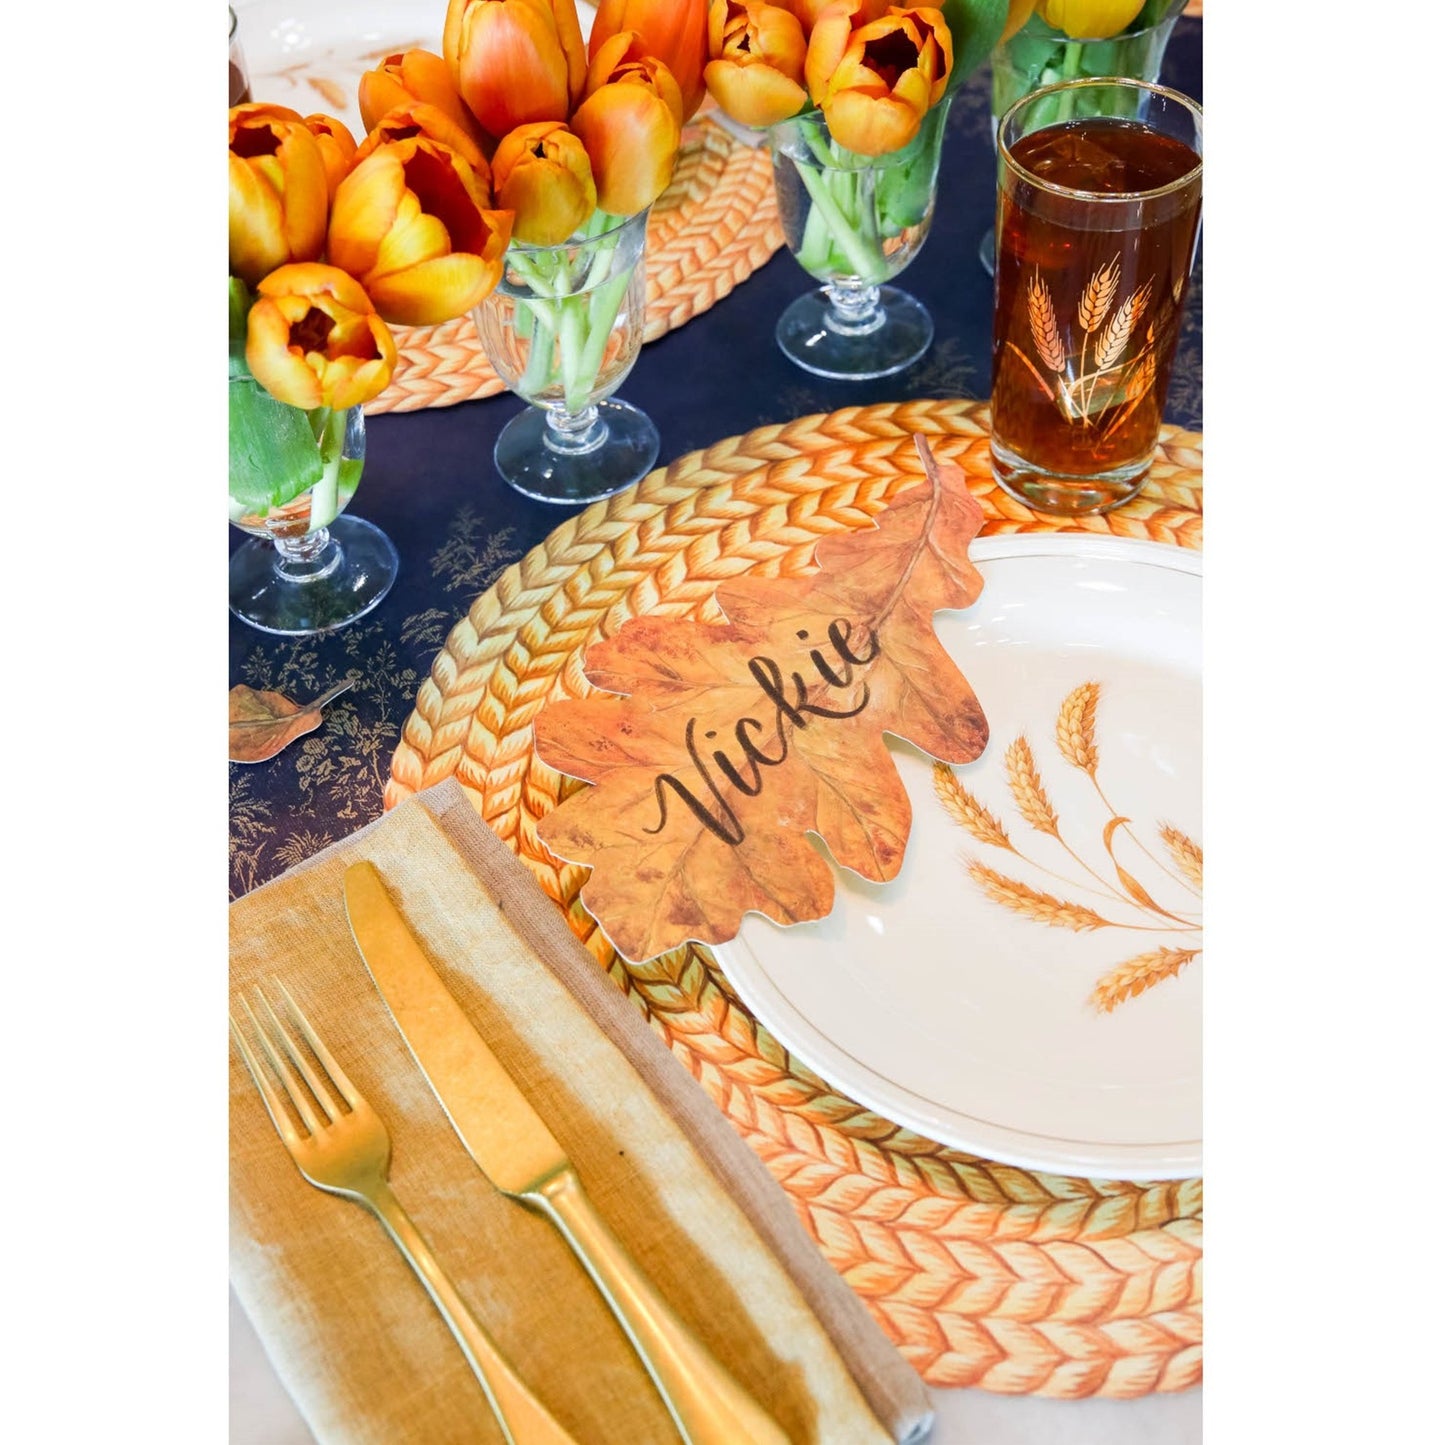 Braided Jute Die Cut Paper Placemat natural color, showing braided texture, during a fall dinner